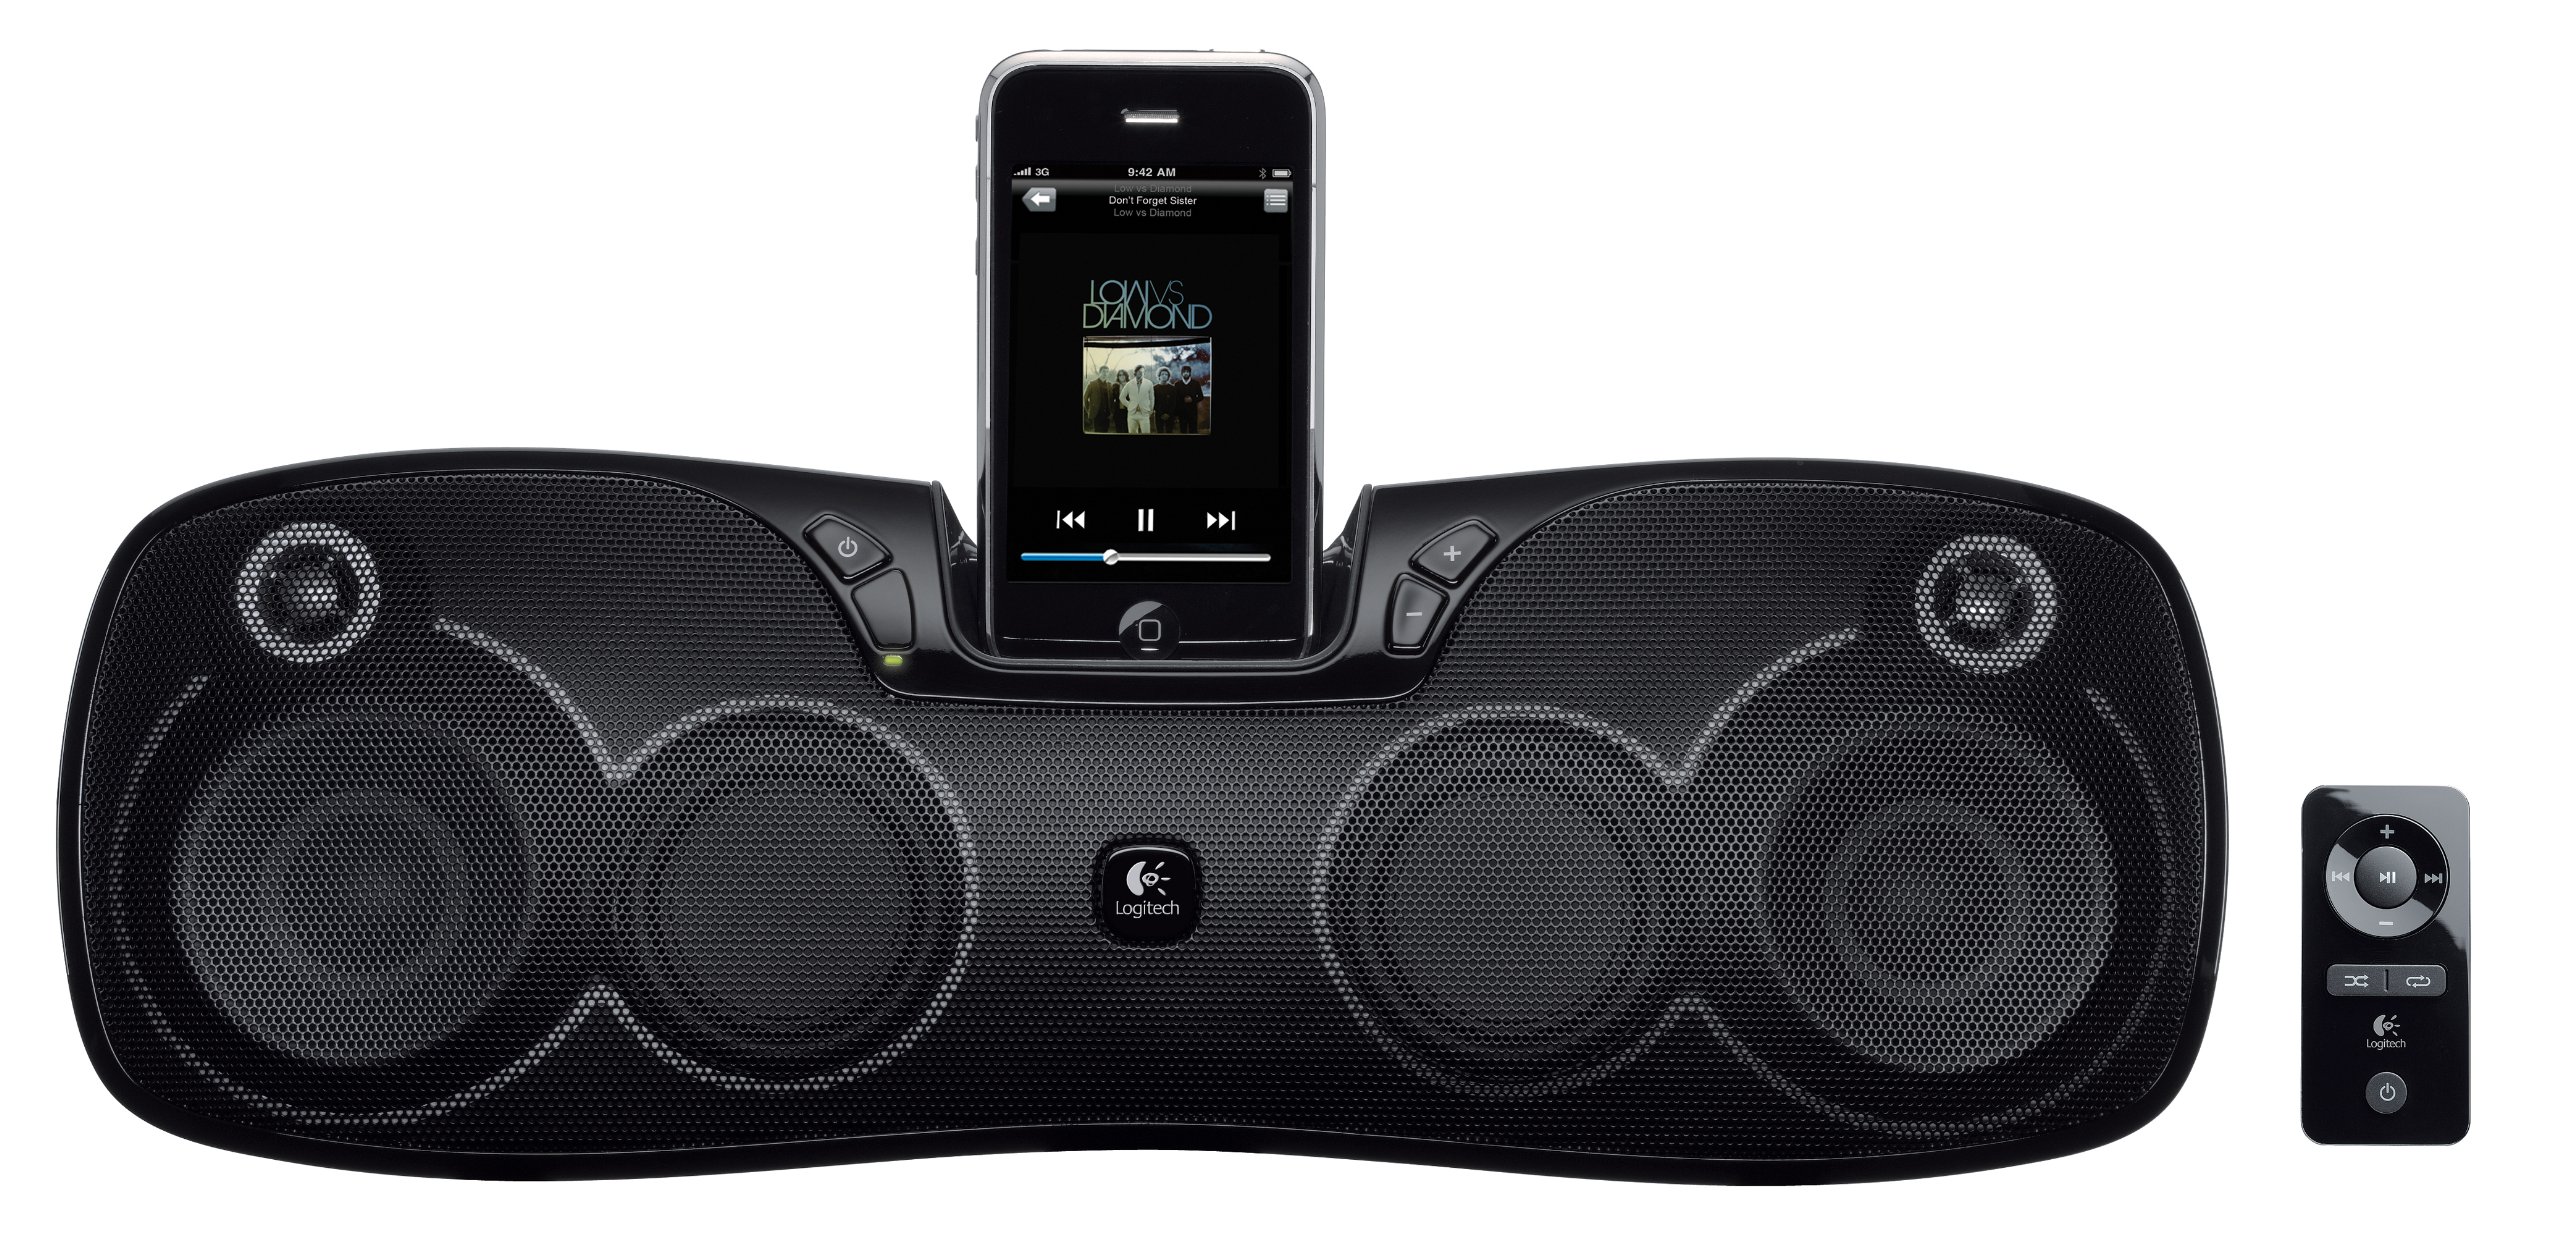 Logitech S715i Portable 30-Pin iPod/iPhone Speaker Dock (Discontinued by Manufacturer)